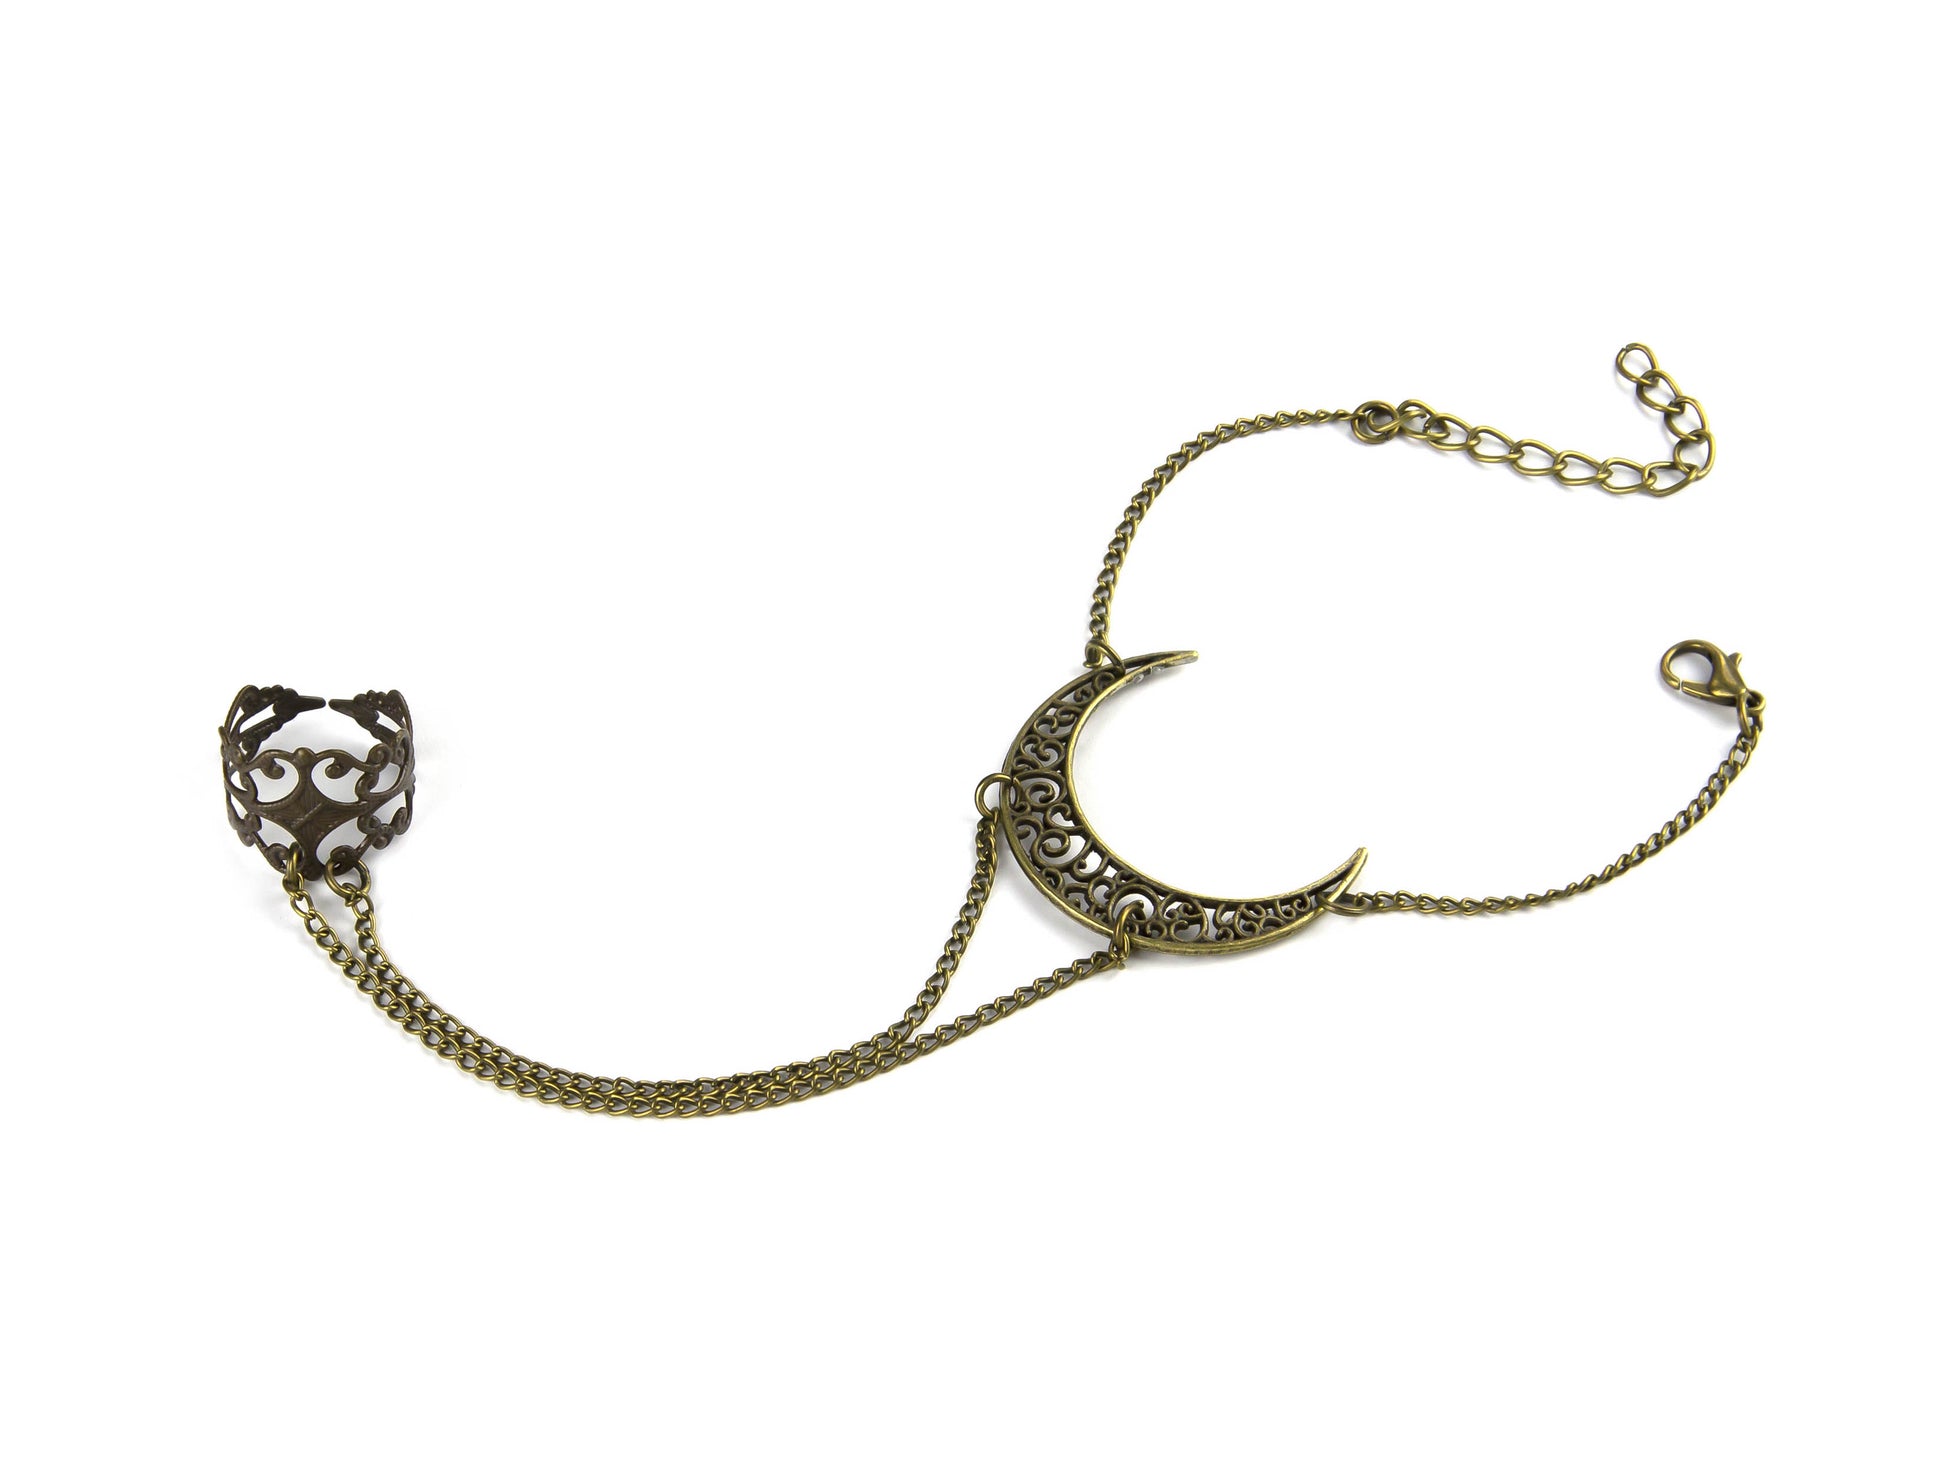 This bronze hand chain bracelet from Myril Jewels features a moon-inspired design, combining neo-gothic elegance with a dark avant-garde touch, ideal for gothic enthusiasts seeking unique, handcrafted jewelry